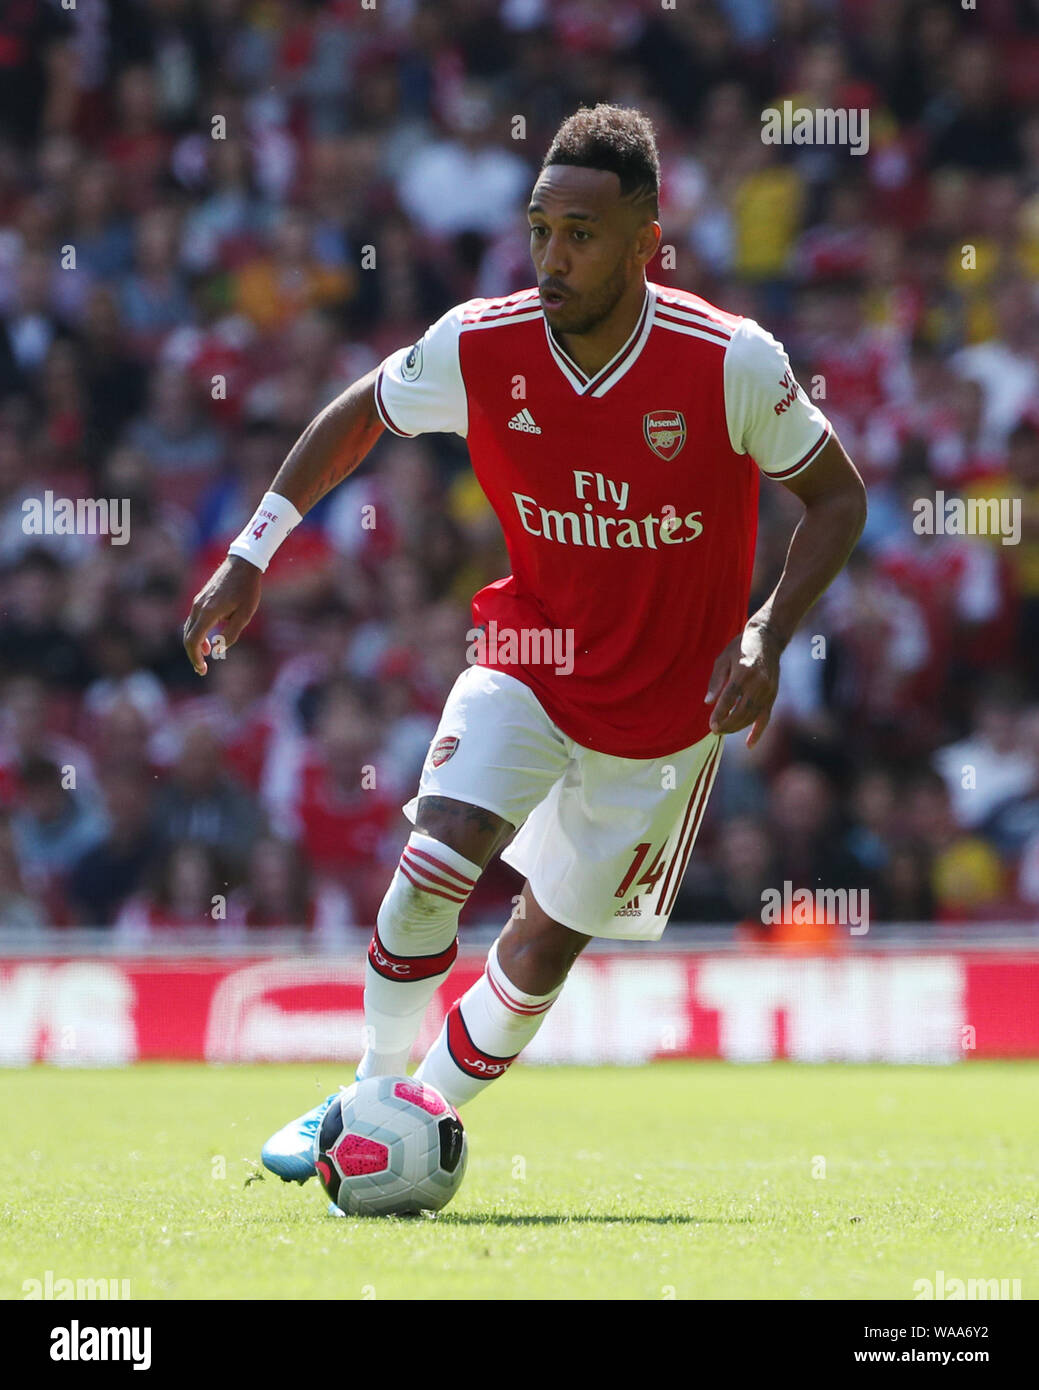 Arsenals Pierre-Emerick Aubameyang during the Premier League match at the Emirates Stadium, London. PRESS ASSOCIATION Photo. Picture date Saturday August 17, 2018